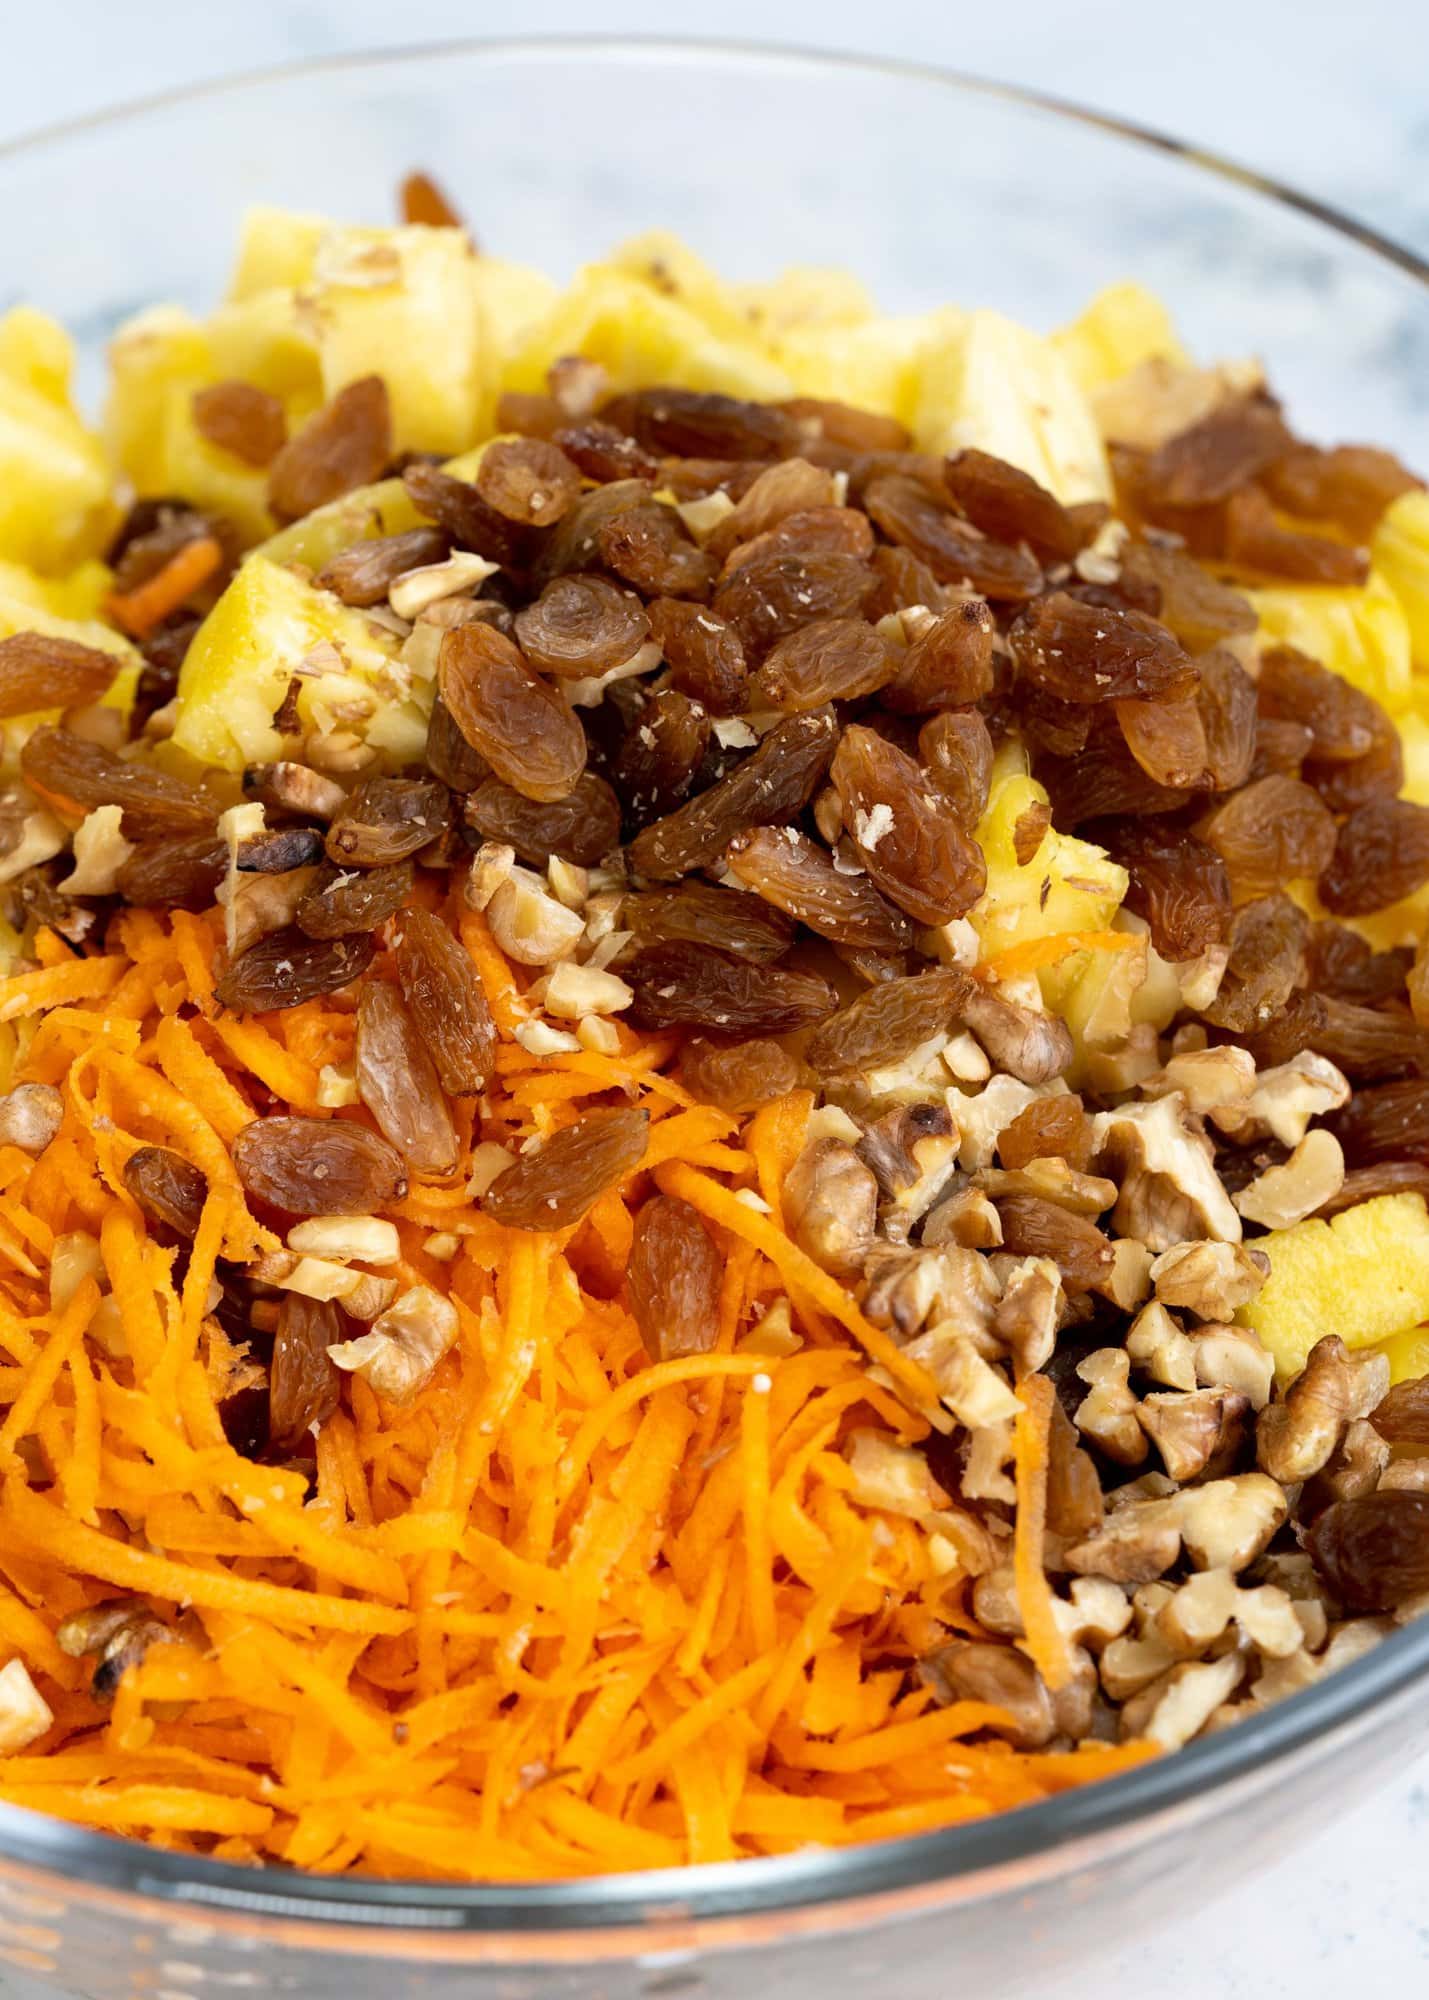 Shows all the ingredients to make carrot salad - shredded carrots, raisins, chopped pineapple and toasted walnuts pieces in a bowl.